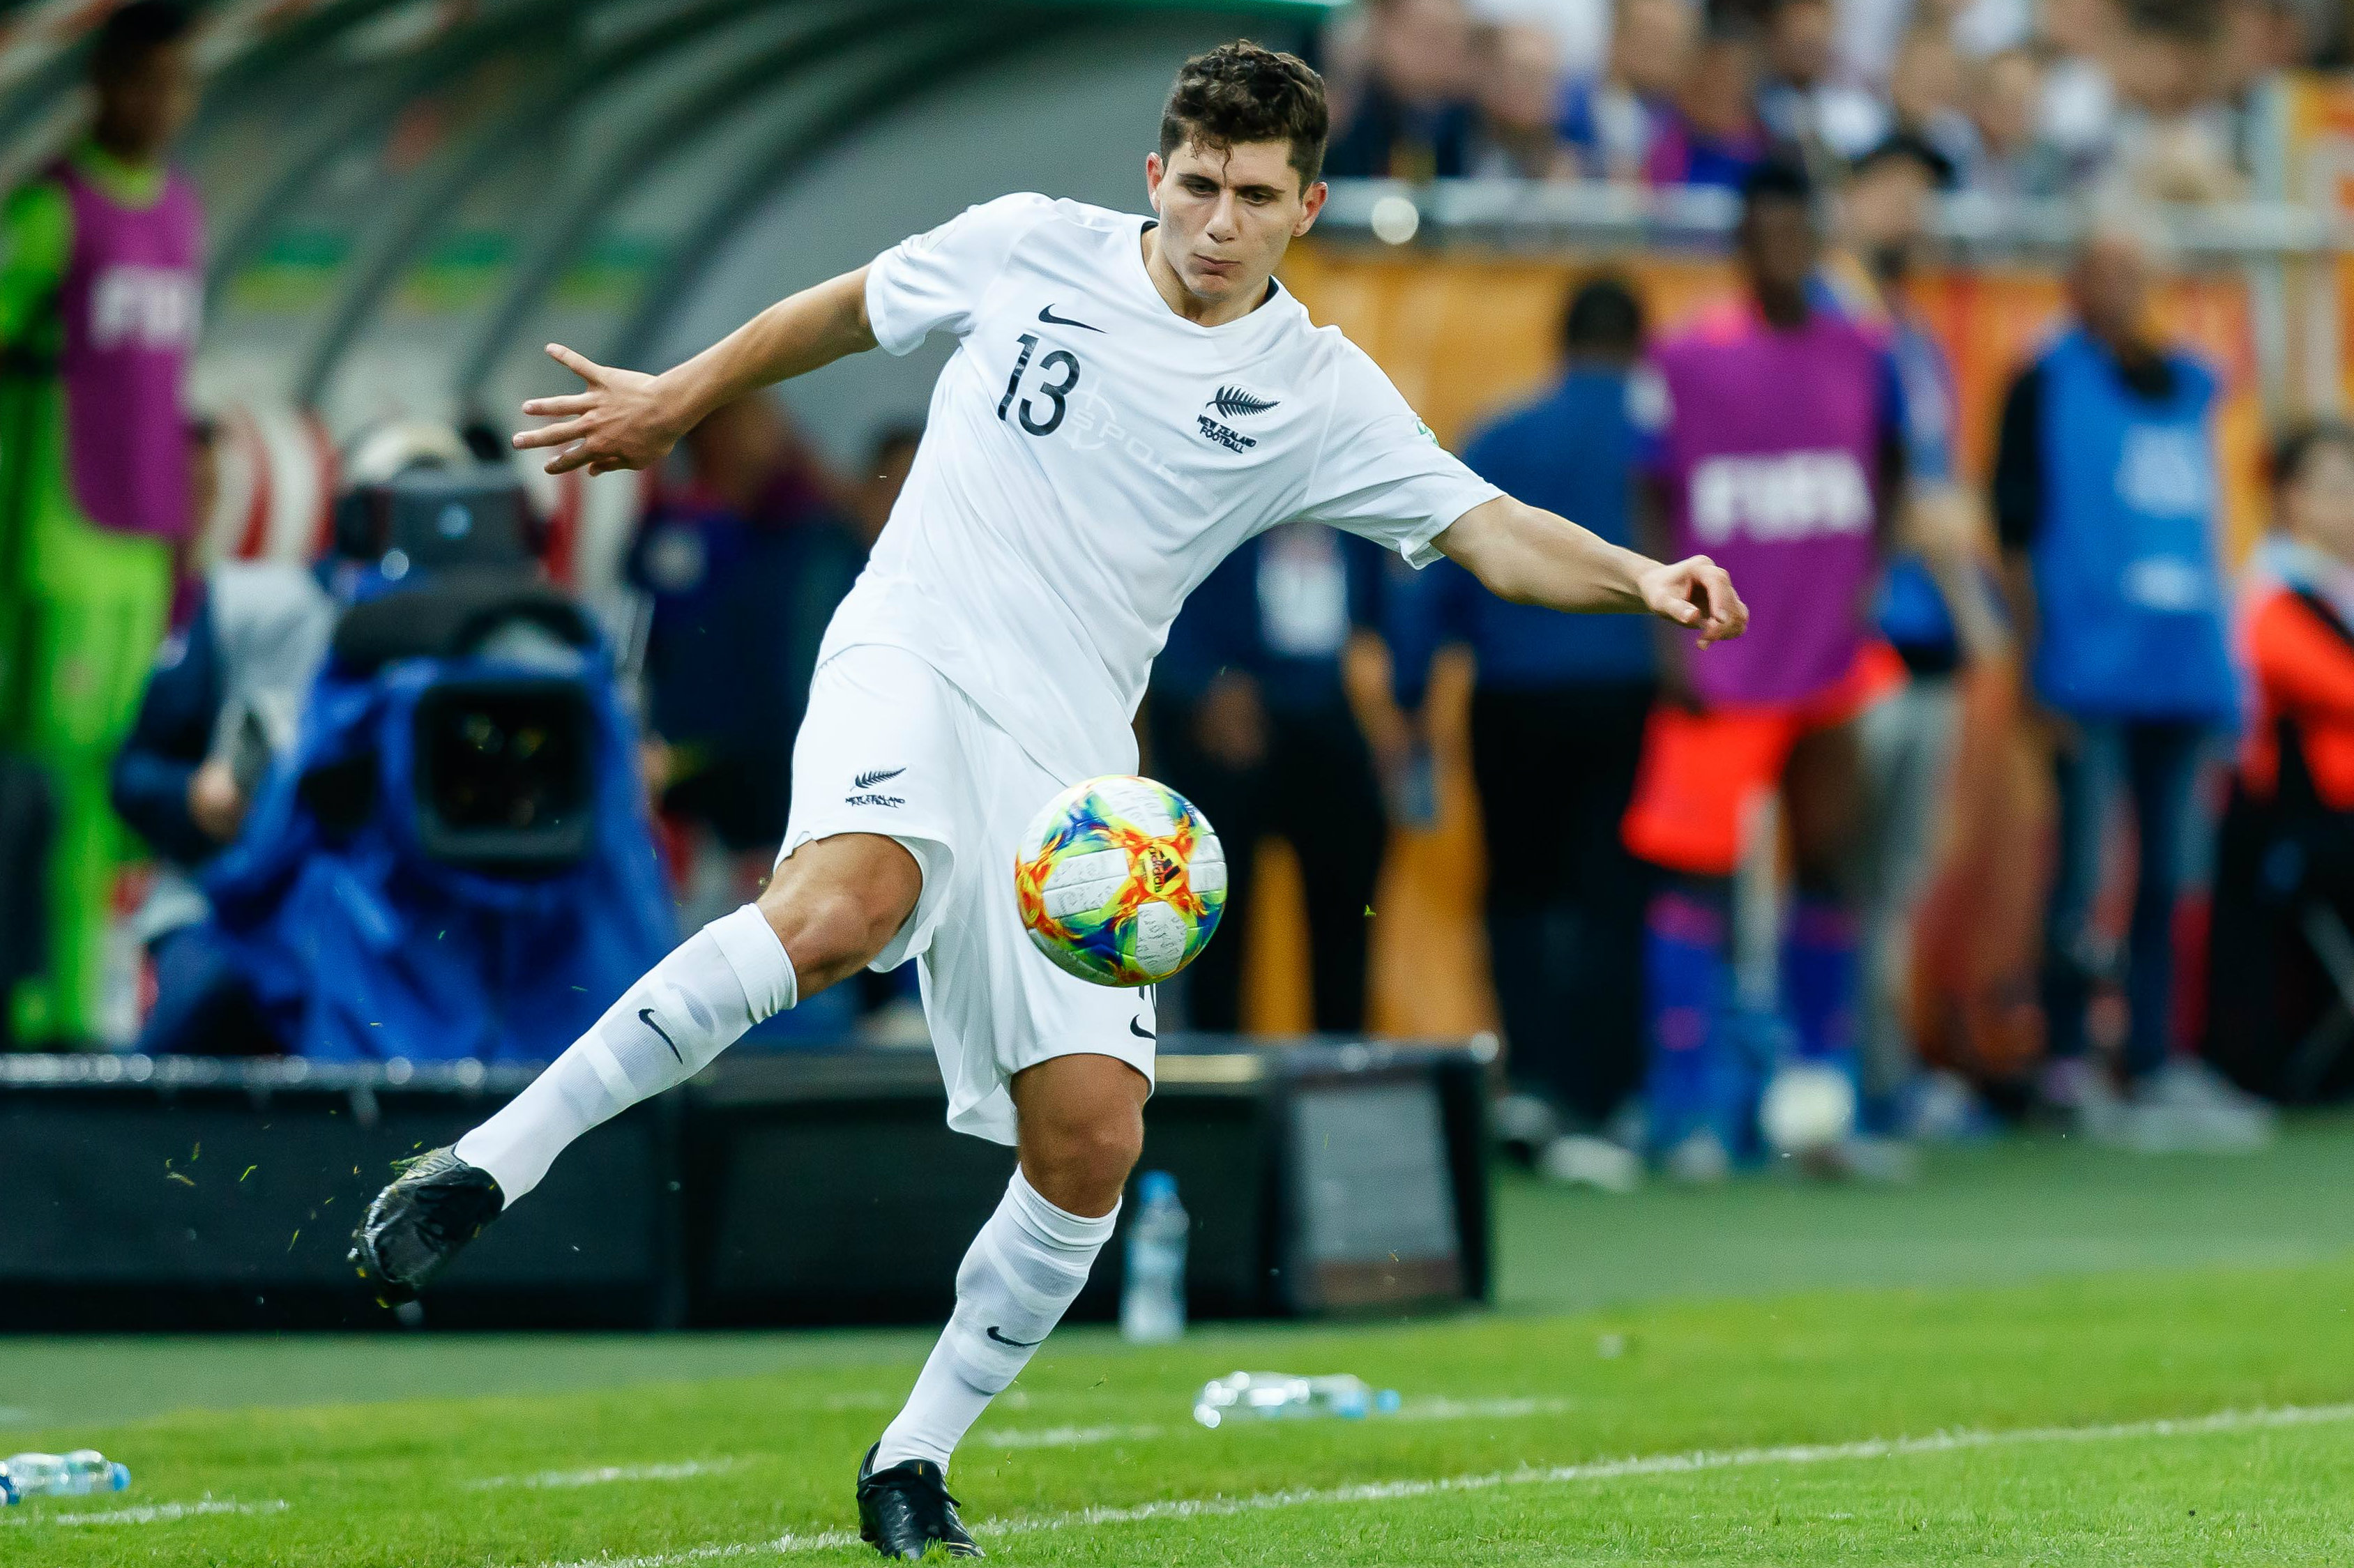 Cacace helped New Zealand reached the last 16 at the recent FIFA U20 World Cup in Poland